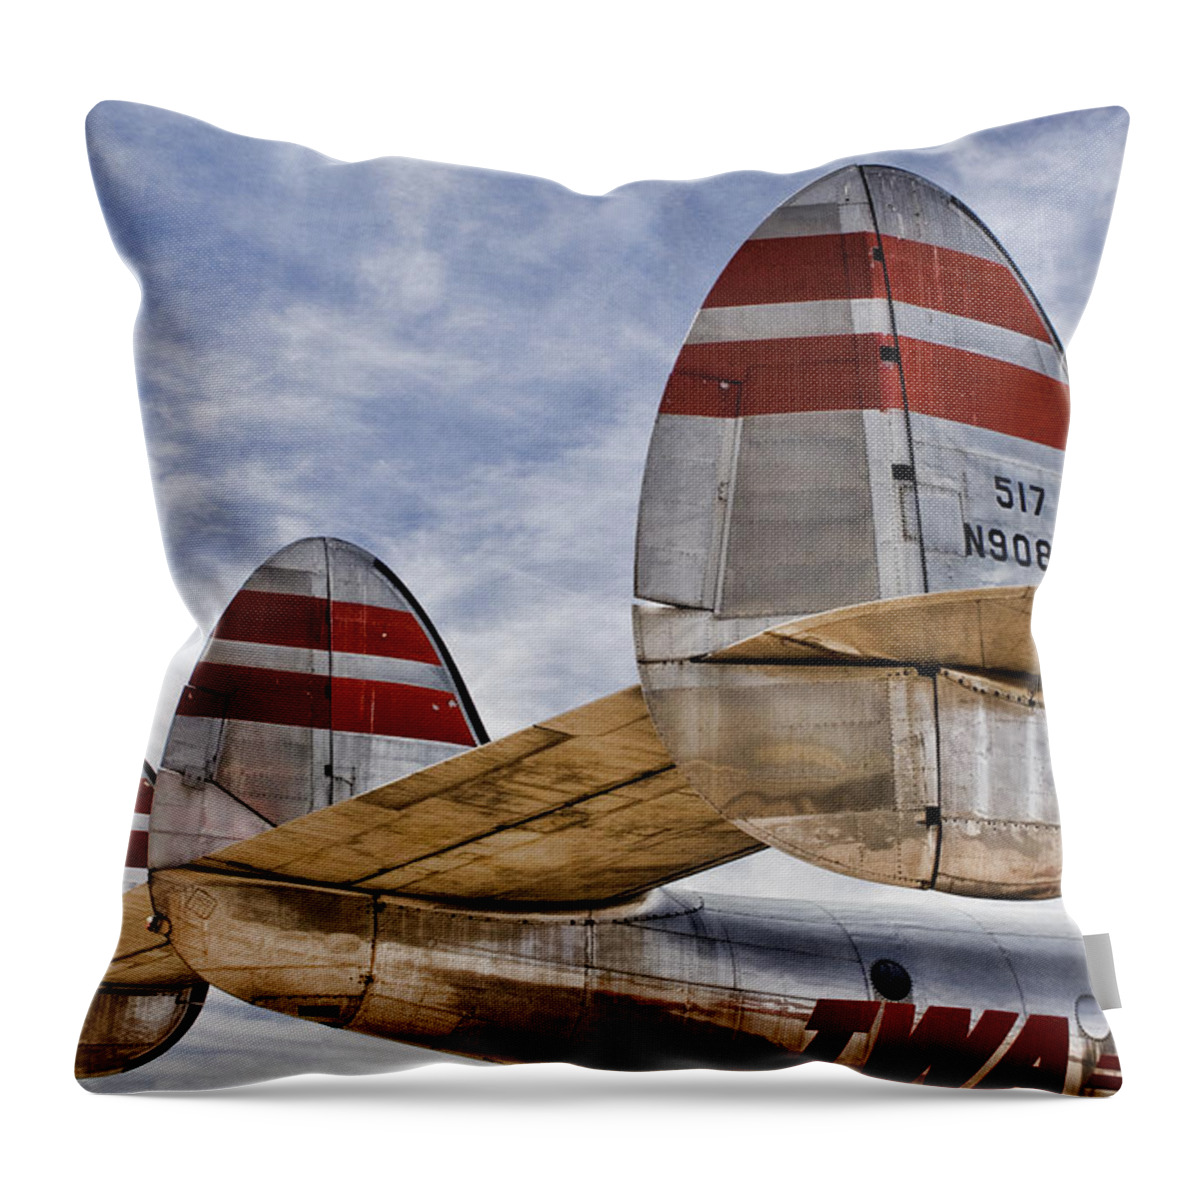 Lockheed Throw Pillow featuring the photograph Lockheed Constellation by Carol Leigh